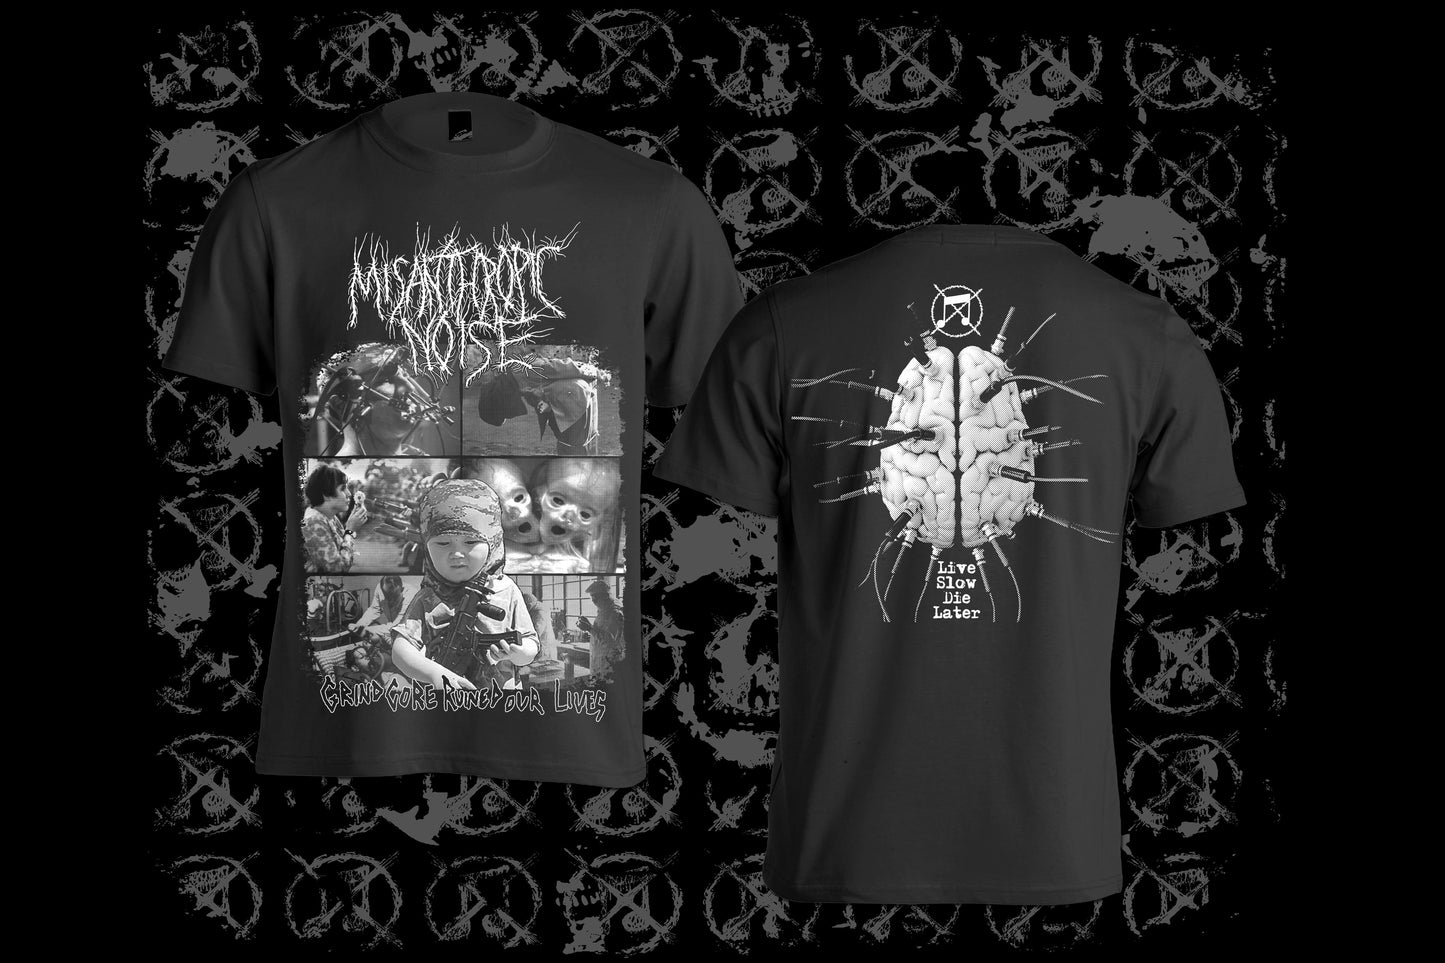 MISANTHROPIC NOISE - Grindcore Ruinded Our Lives T-shirt